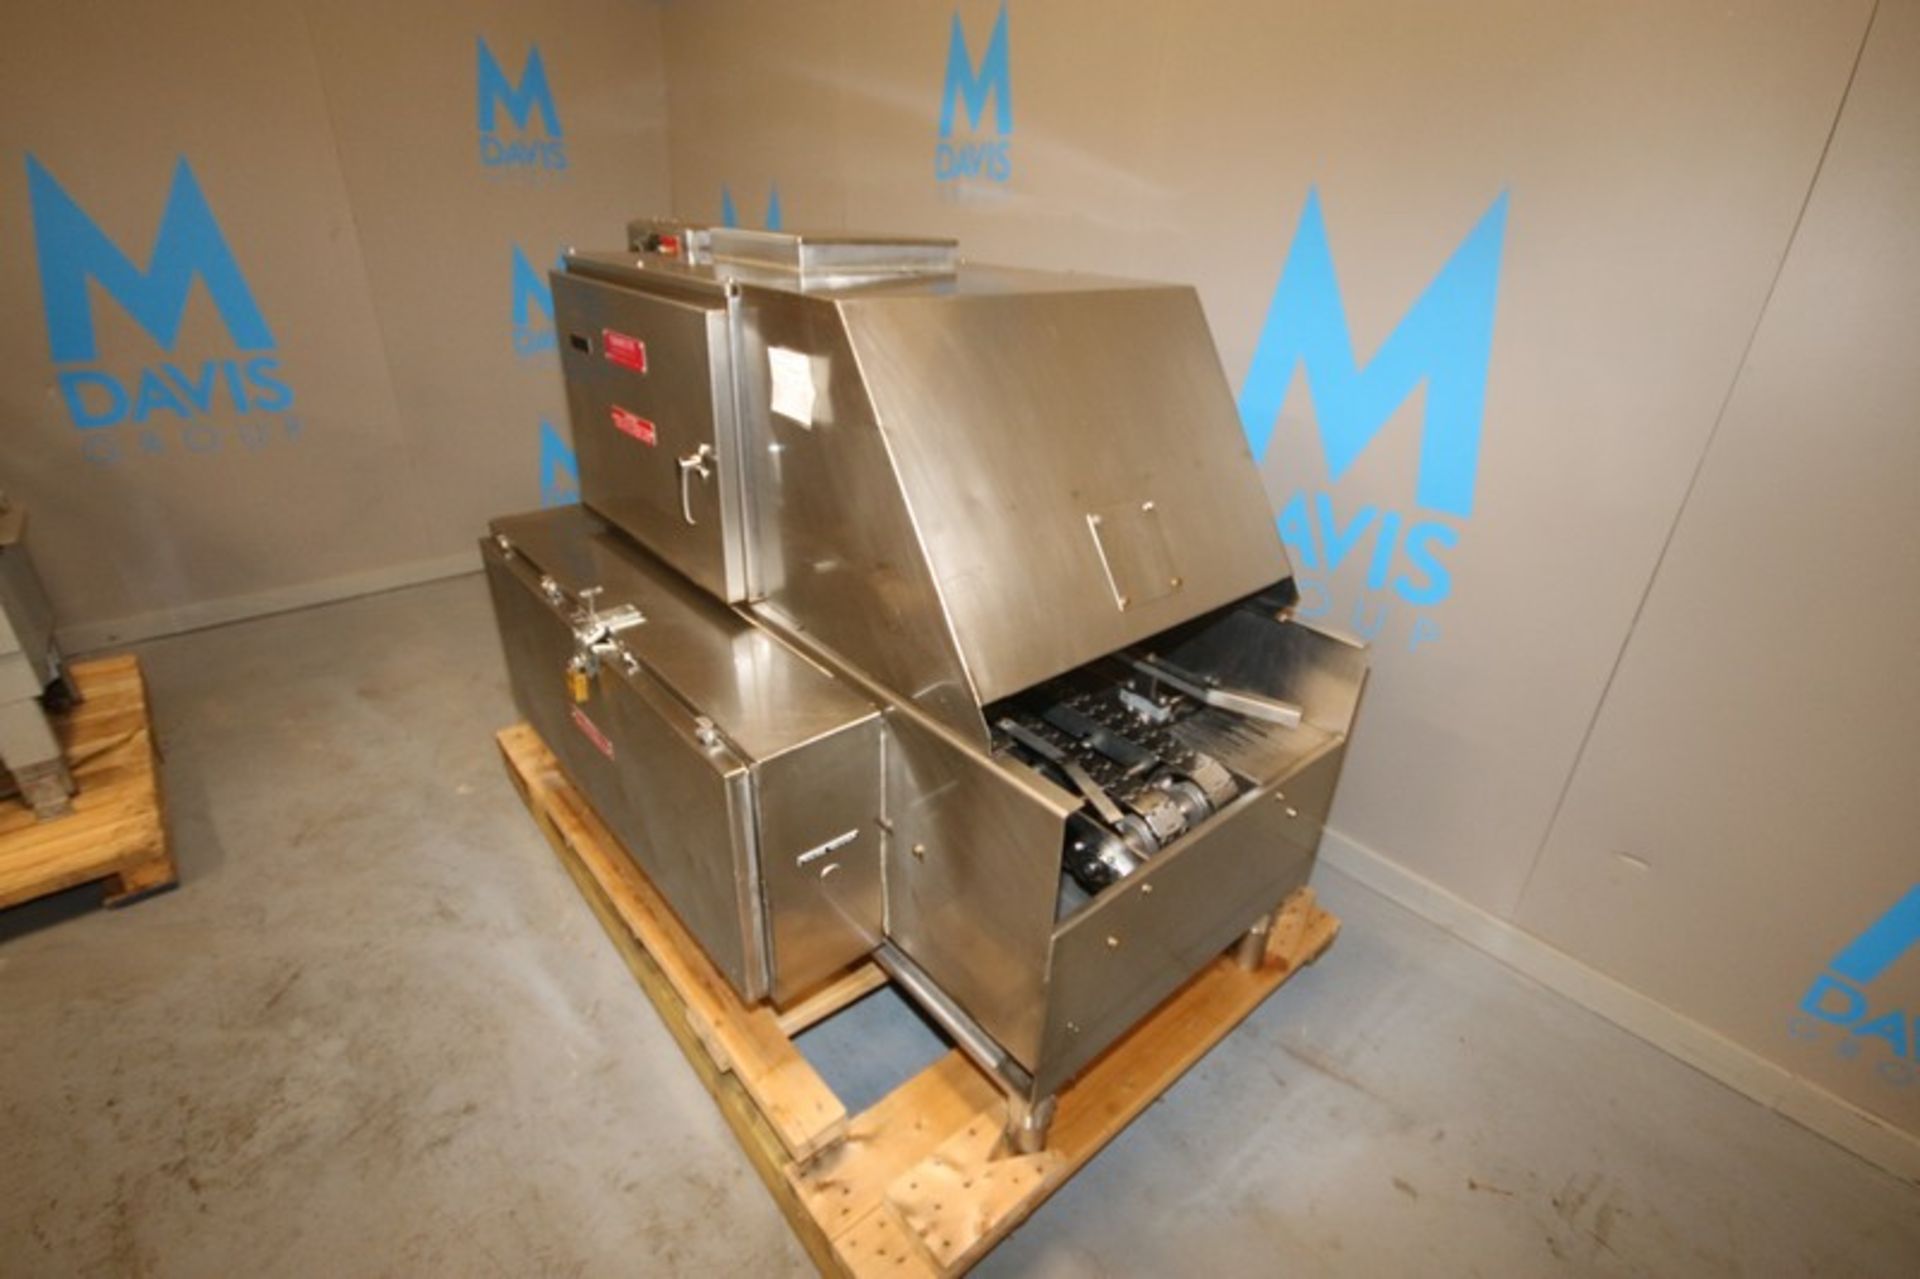 Mallet S/S Bread Pan Oiler, M/N 2001A, S/N 243-456, 460 Volts, 3 Phase, with Casters (INV#77729)( - Image 11 of 11